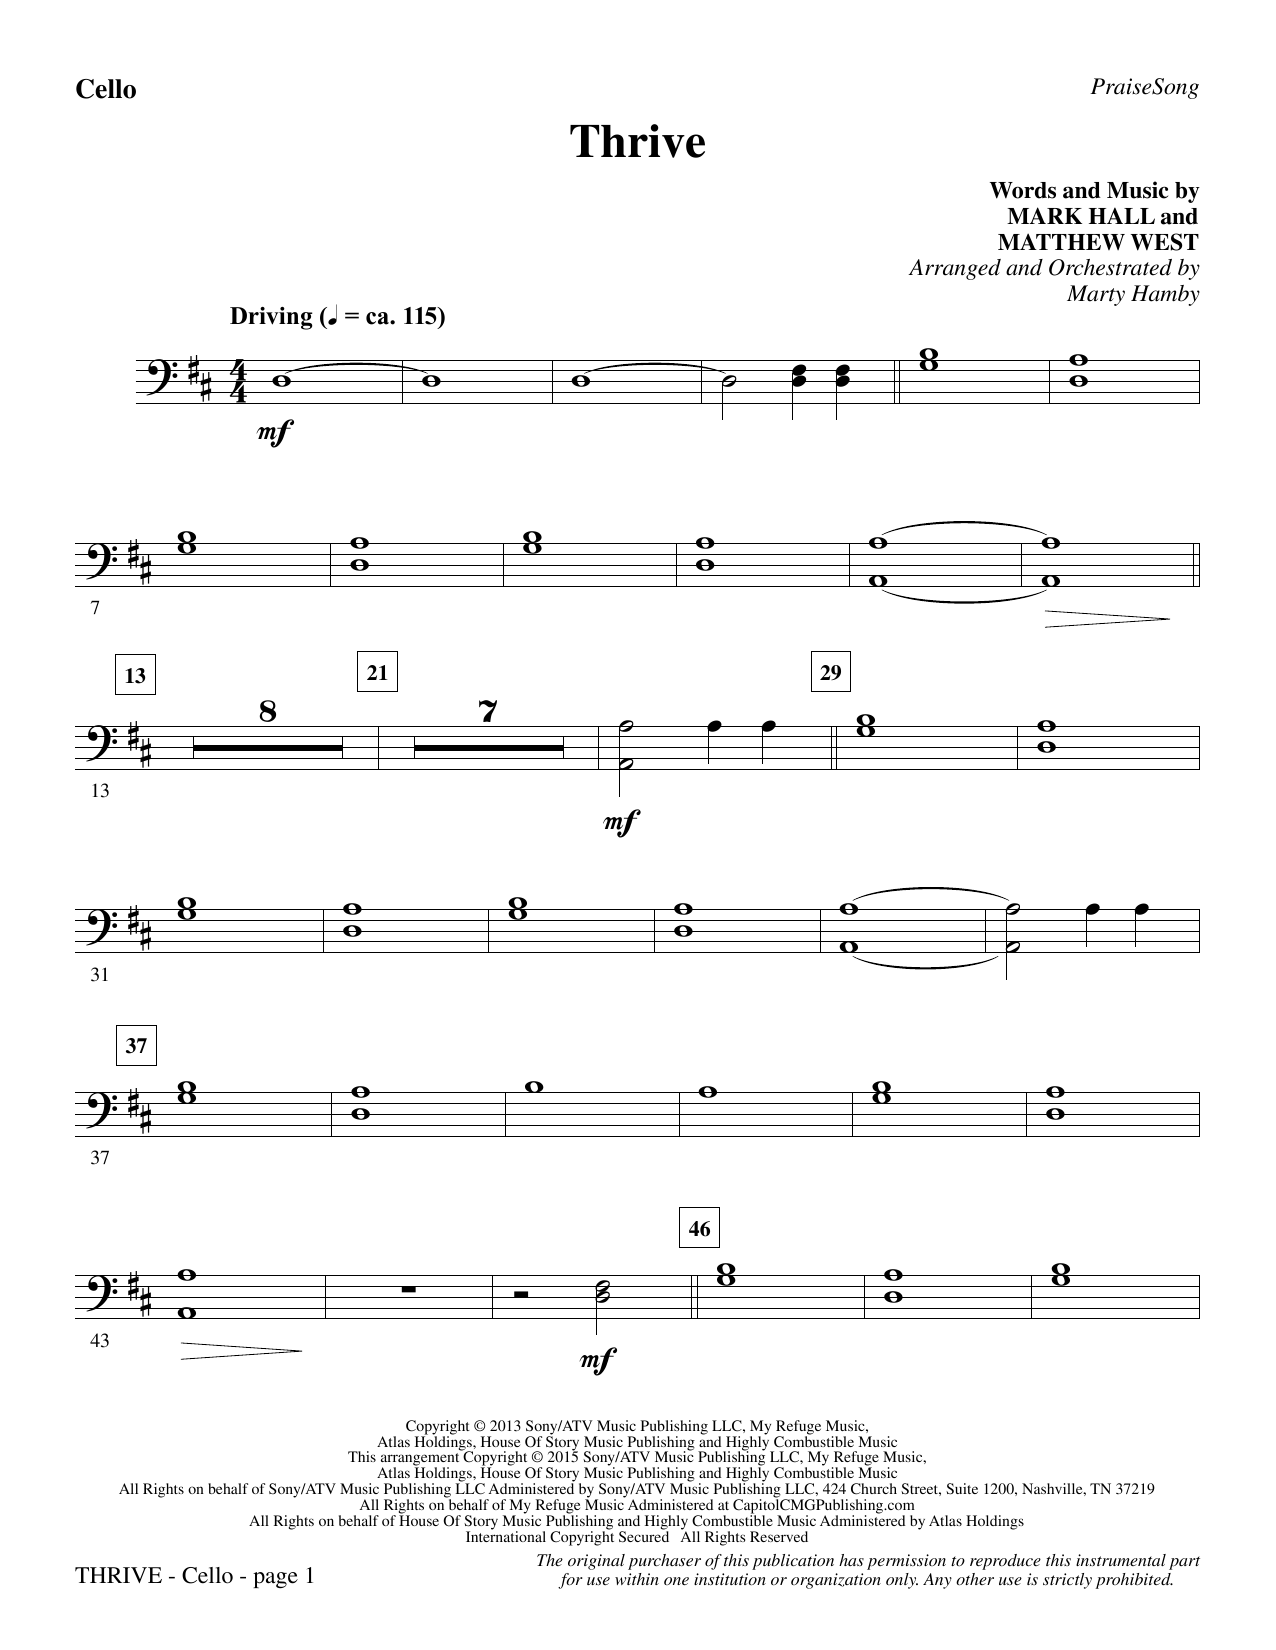 Marty Hamby Thrive - Cello sheet music notes and chords. Download Printable PDF.